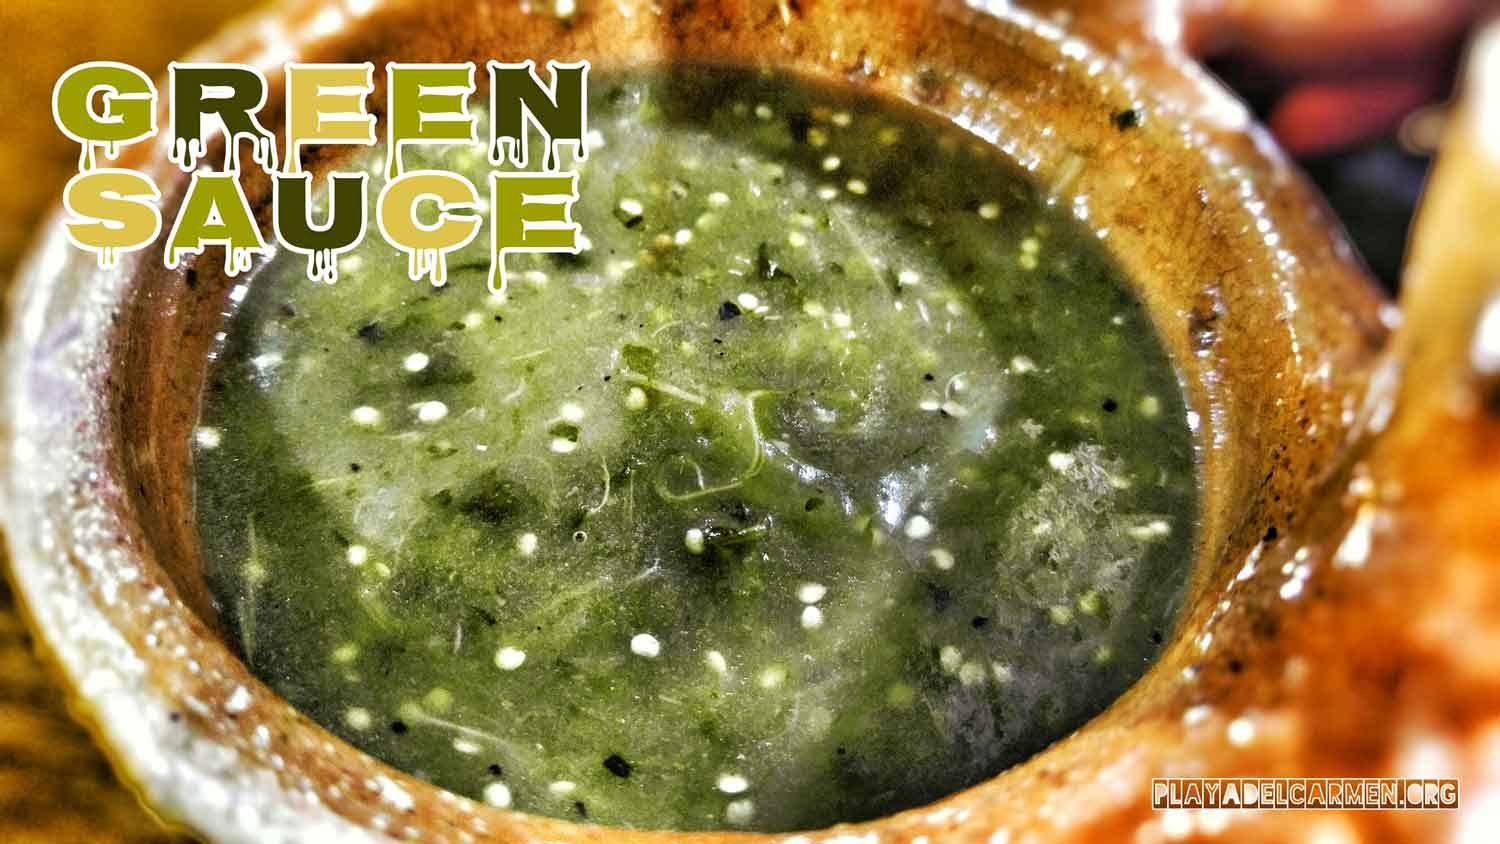 Authentic green sauce served at one of the many restaurants on 5th Avenue.